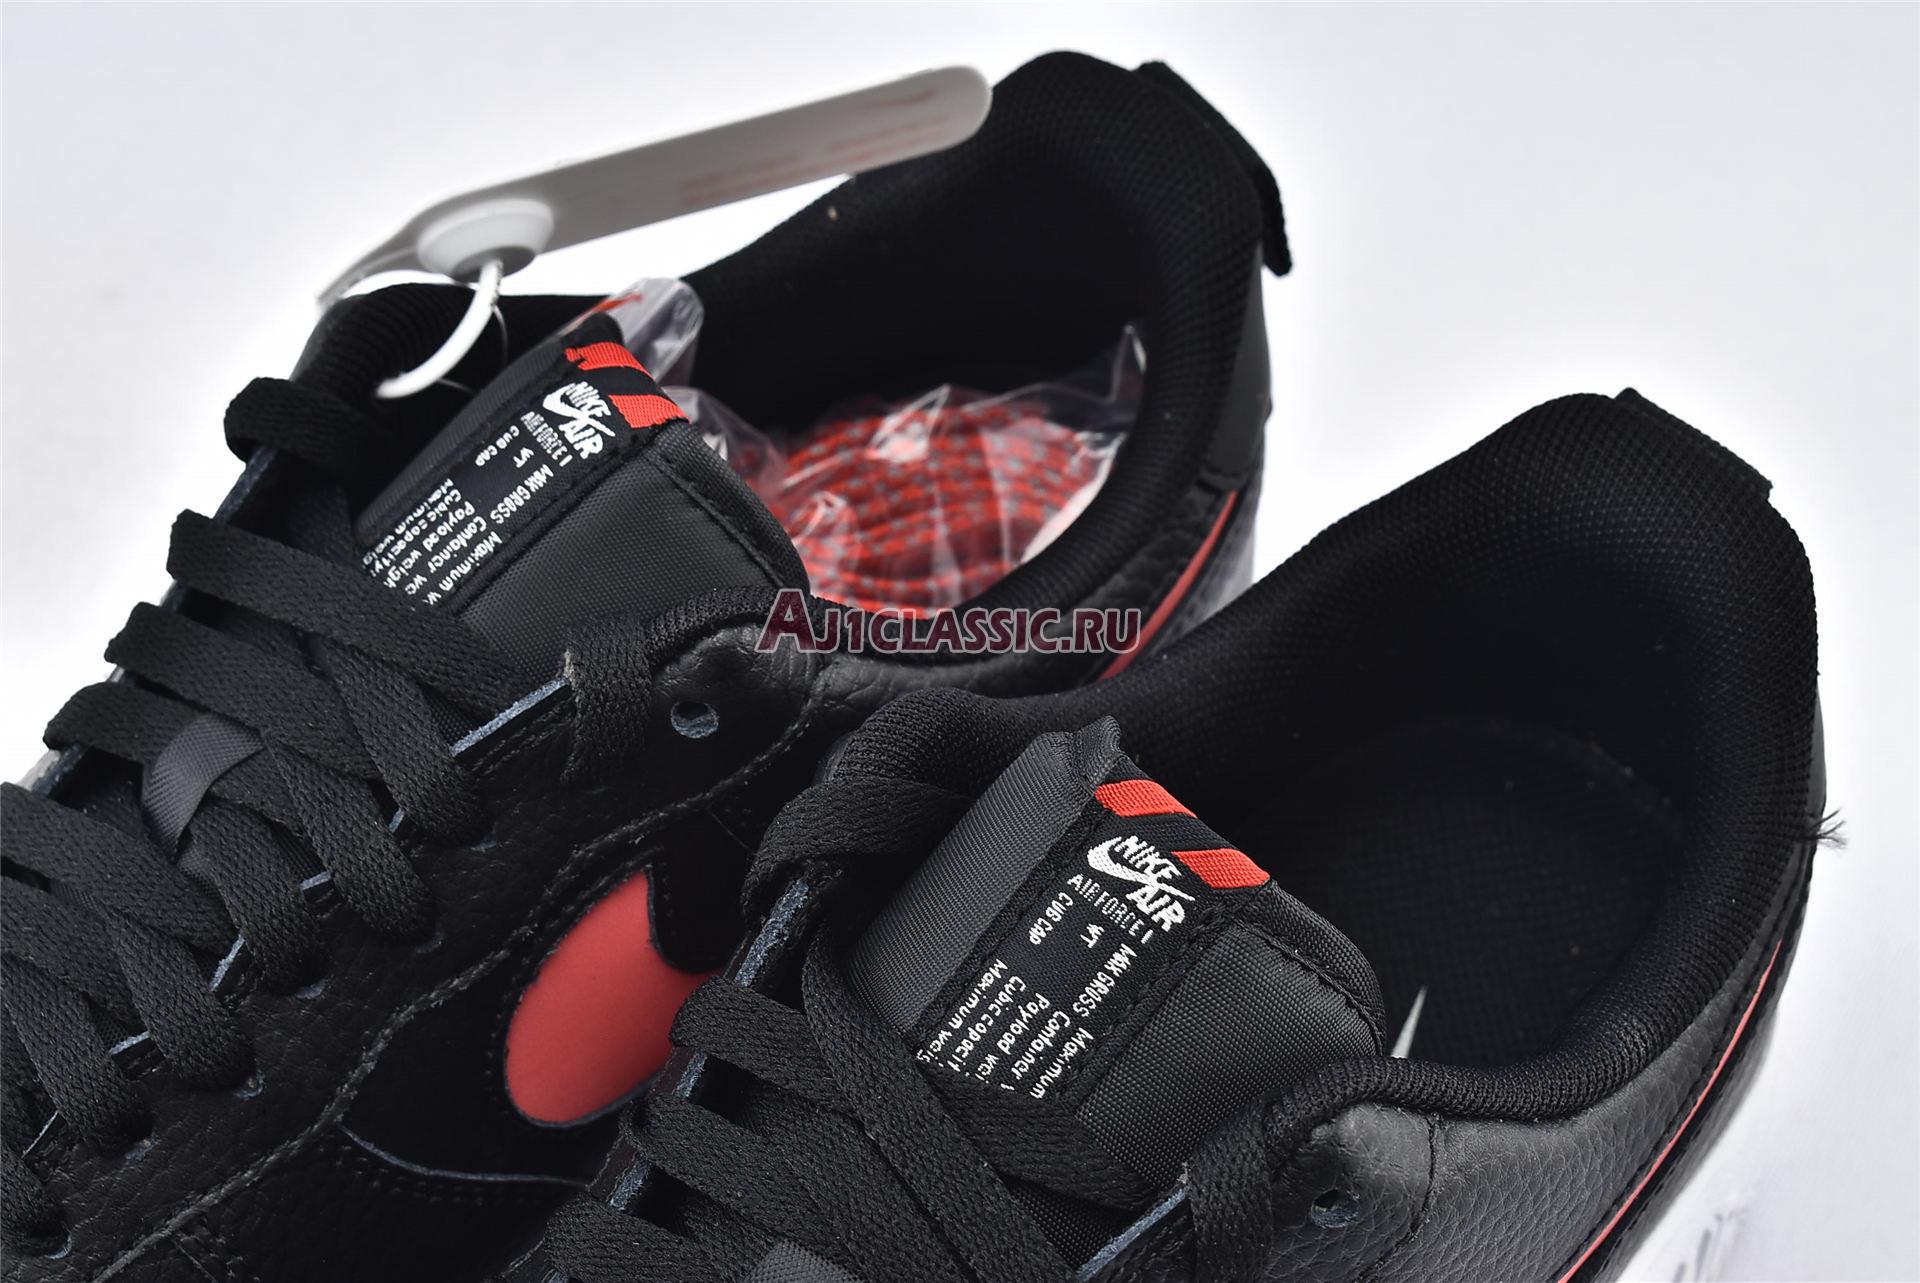 Nike Air Force 1 Low LV8 Utility "Bred" CW7579-001